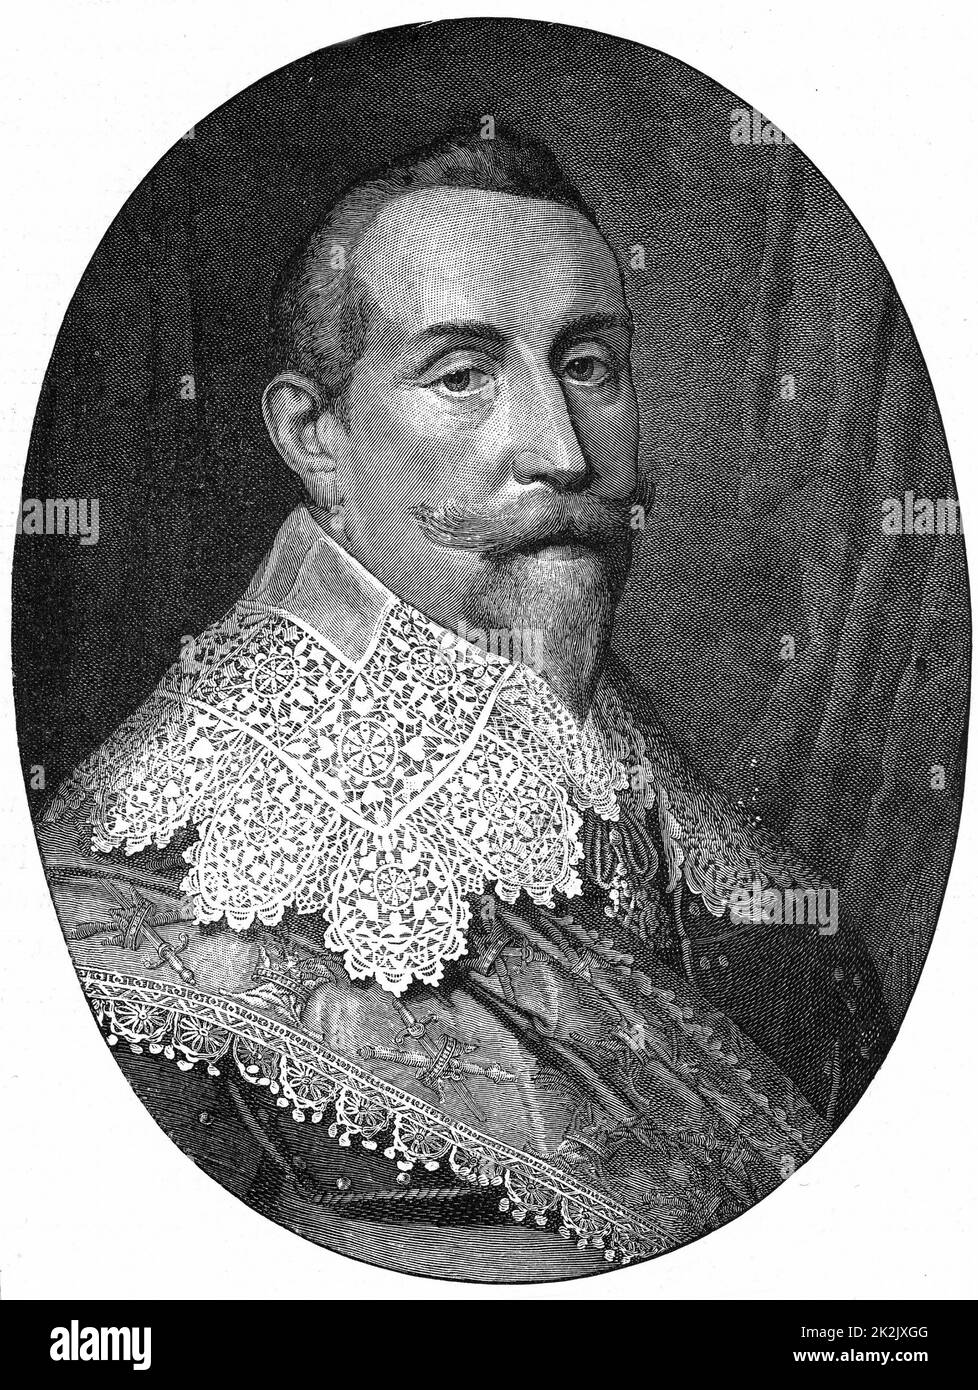 Gustav II Adolf (Gustavus Adolphus 1594-1632) King of Sweden from 1611. Leader of Protestants in Thirty Years War. Engraving after portrait by Miereveldt Stock Photo